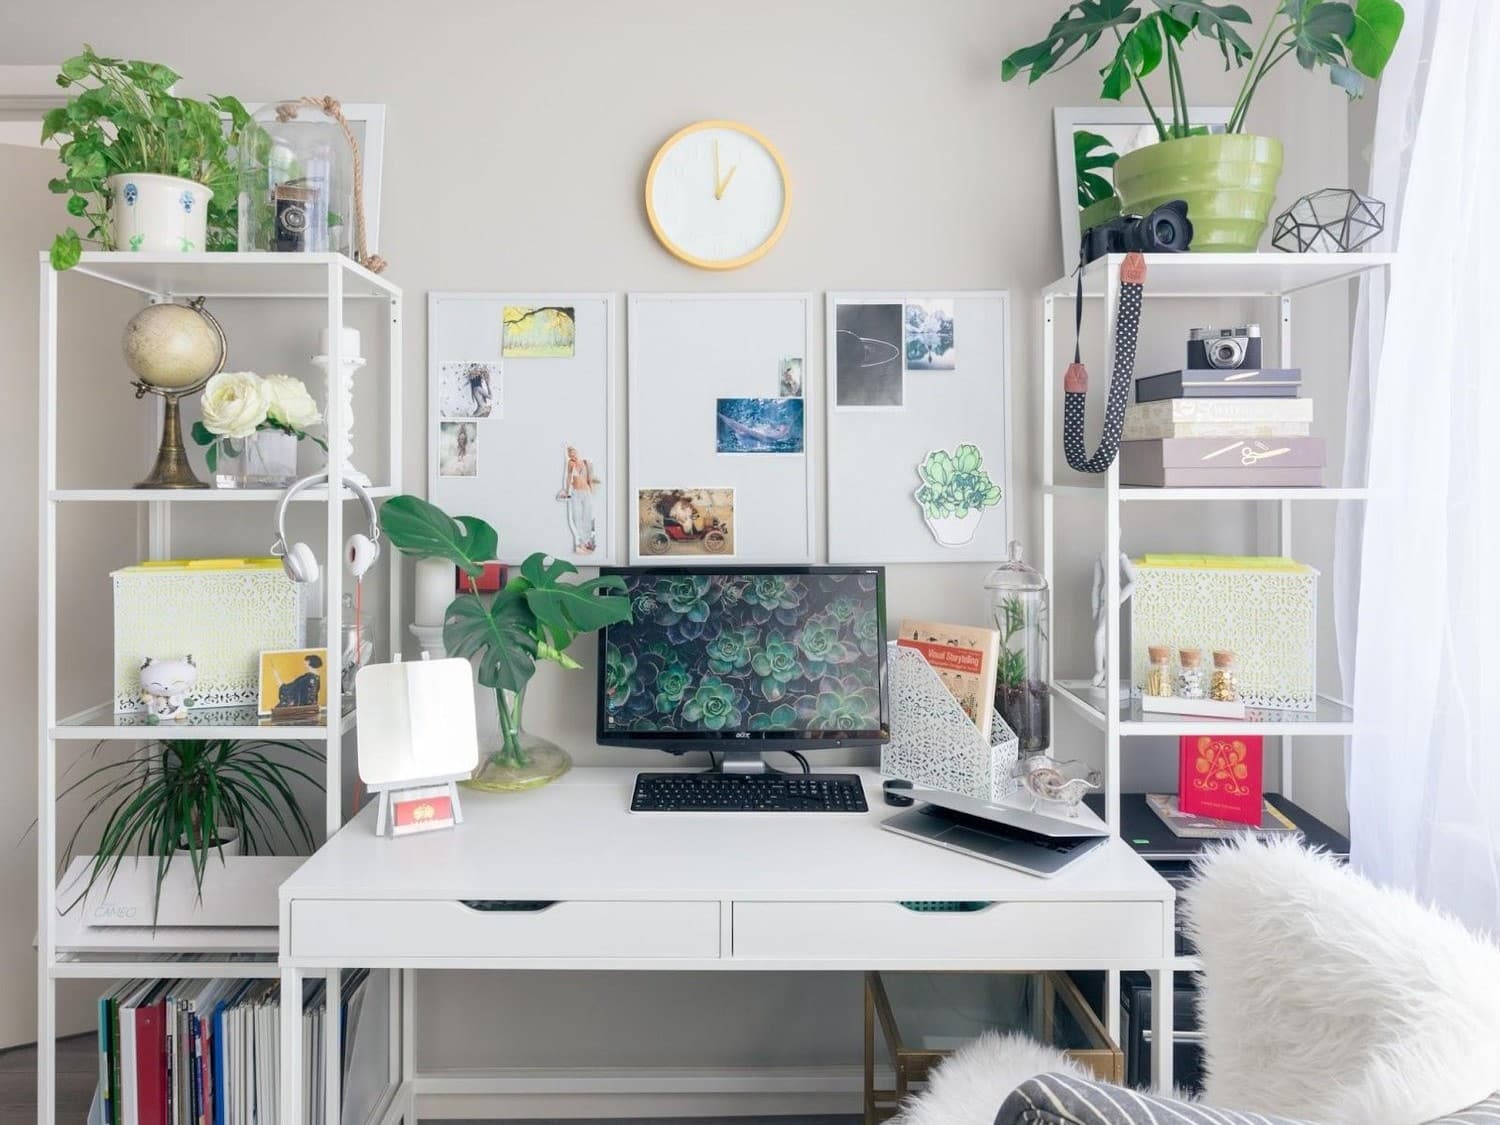 HOW TO HIDE CORDS BEHIND A DESK THAT IS AGAINST A WALL OR WINDOW – Stay  Home Style